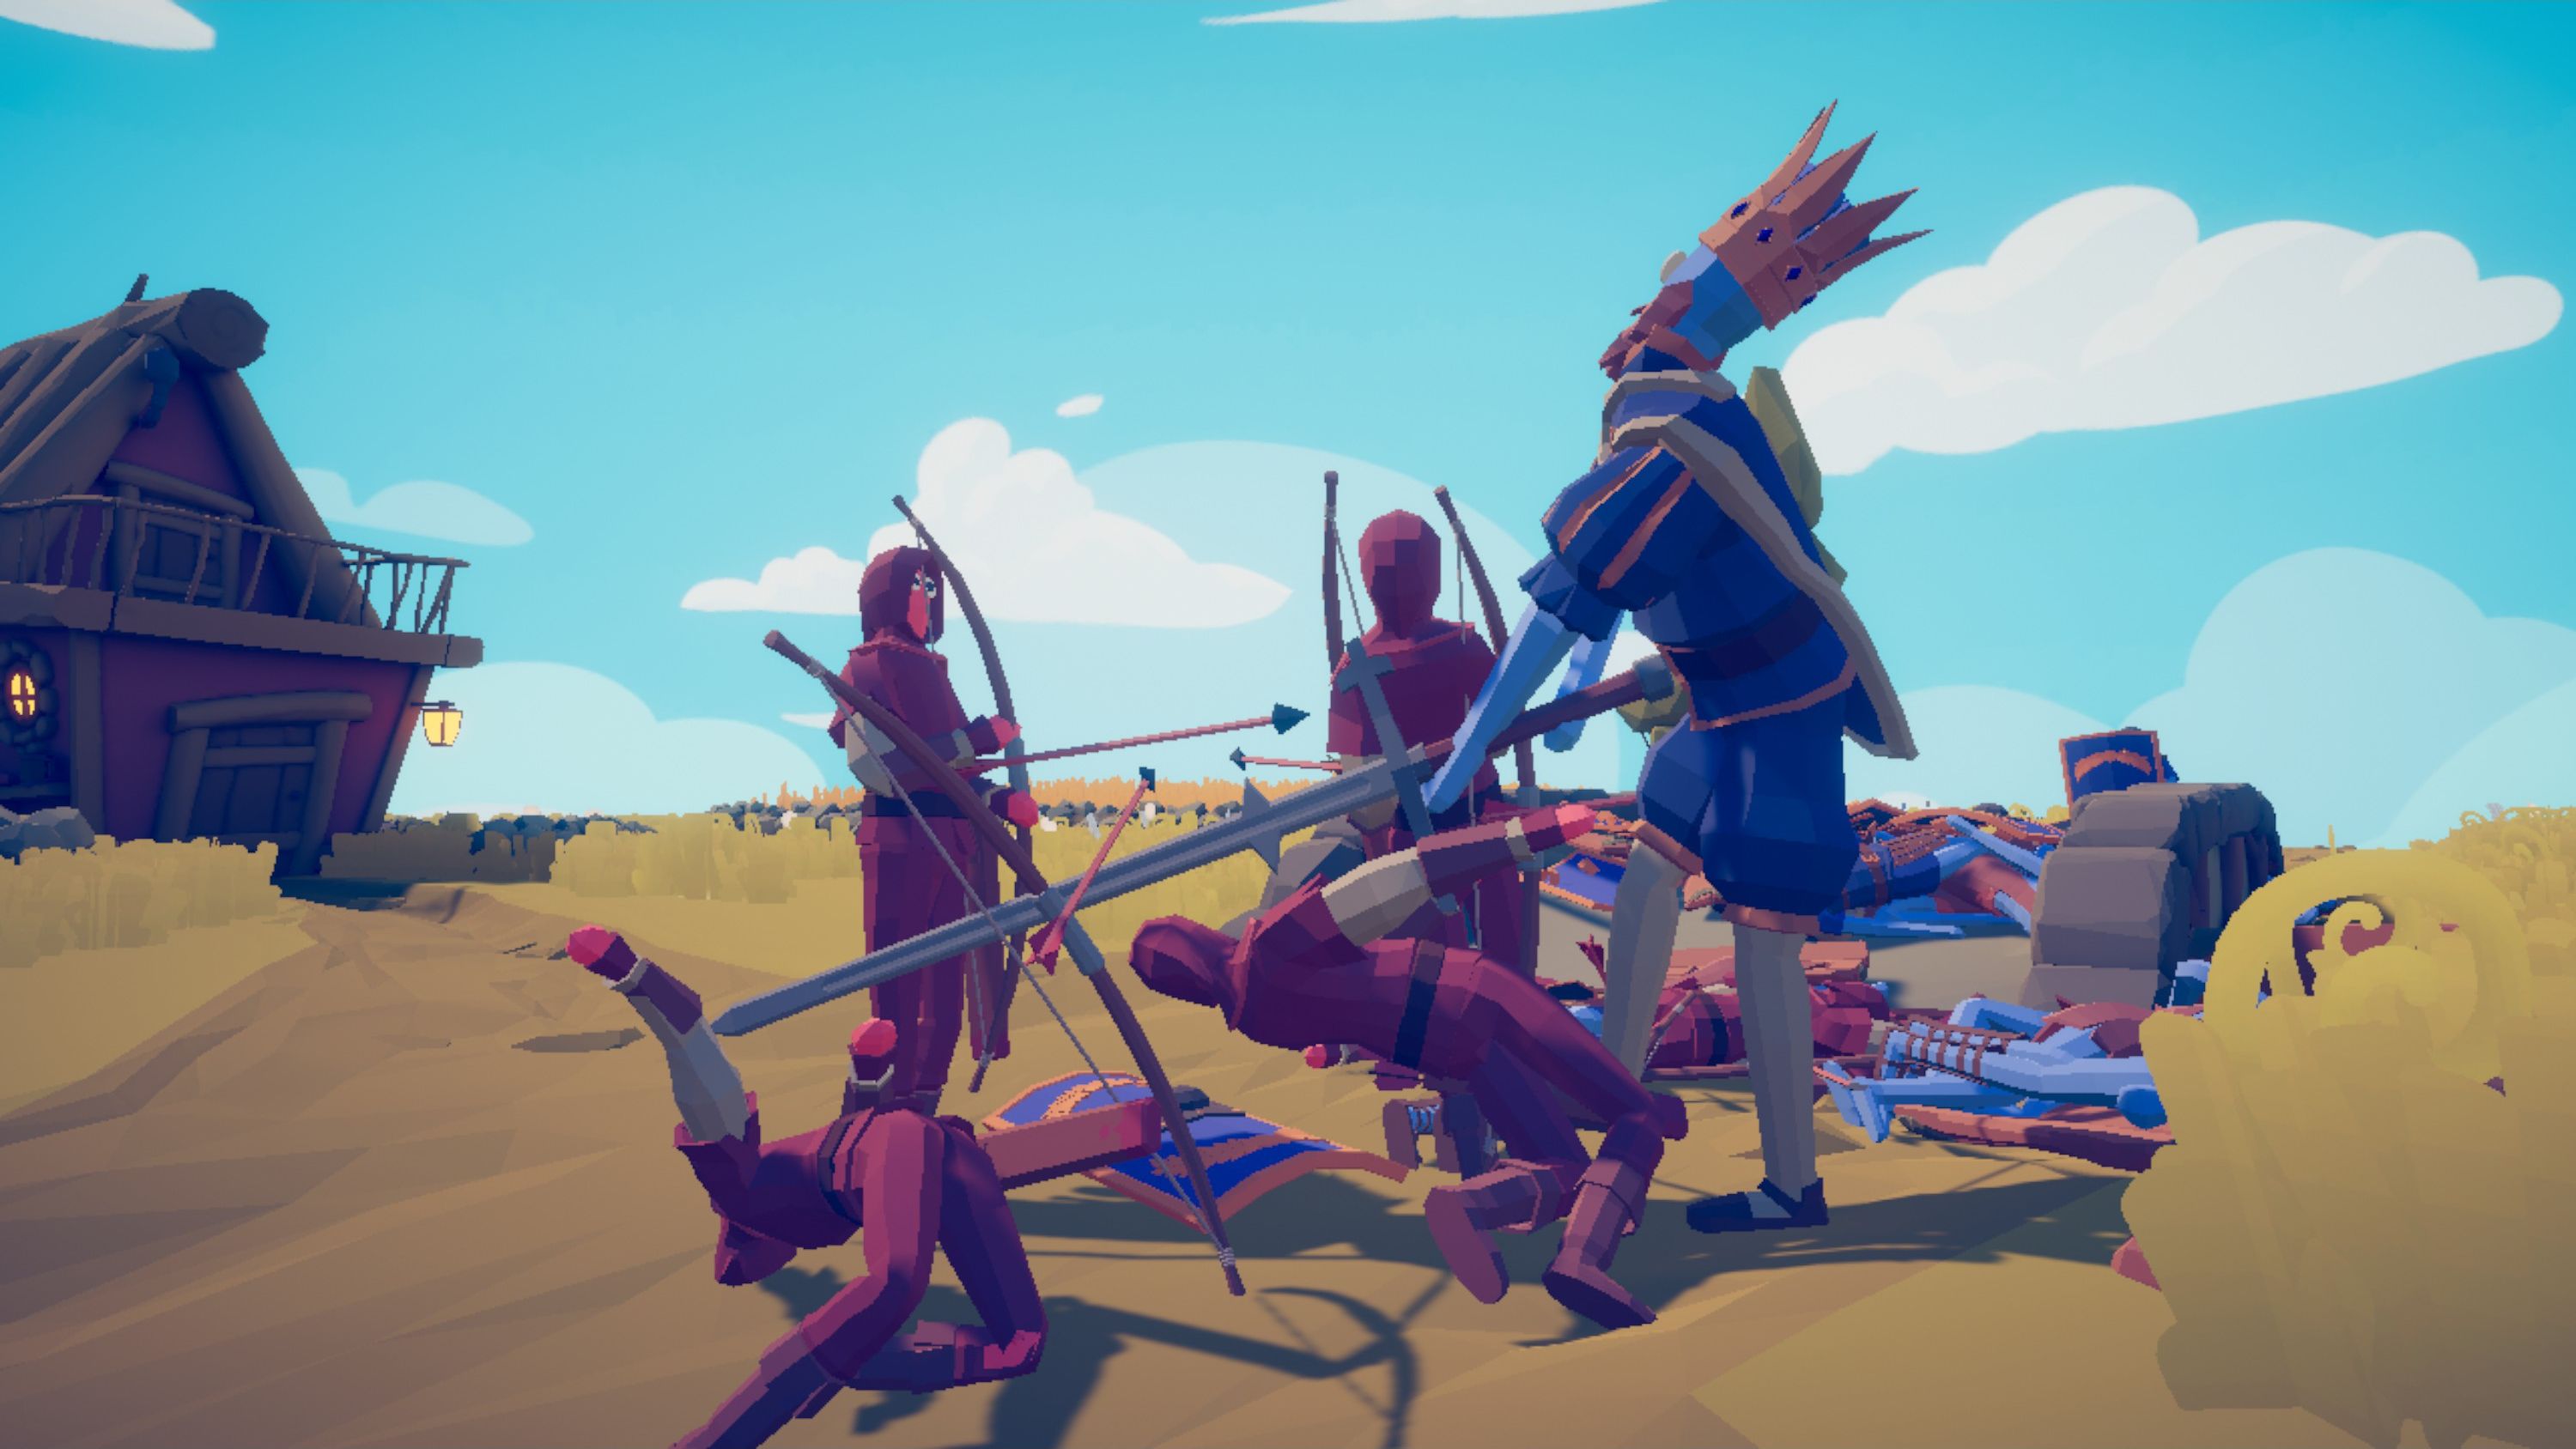 totally accurate battle simulator to play